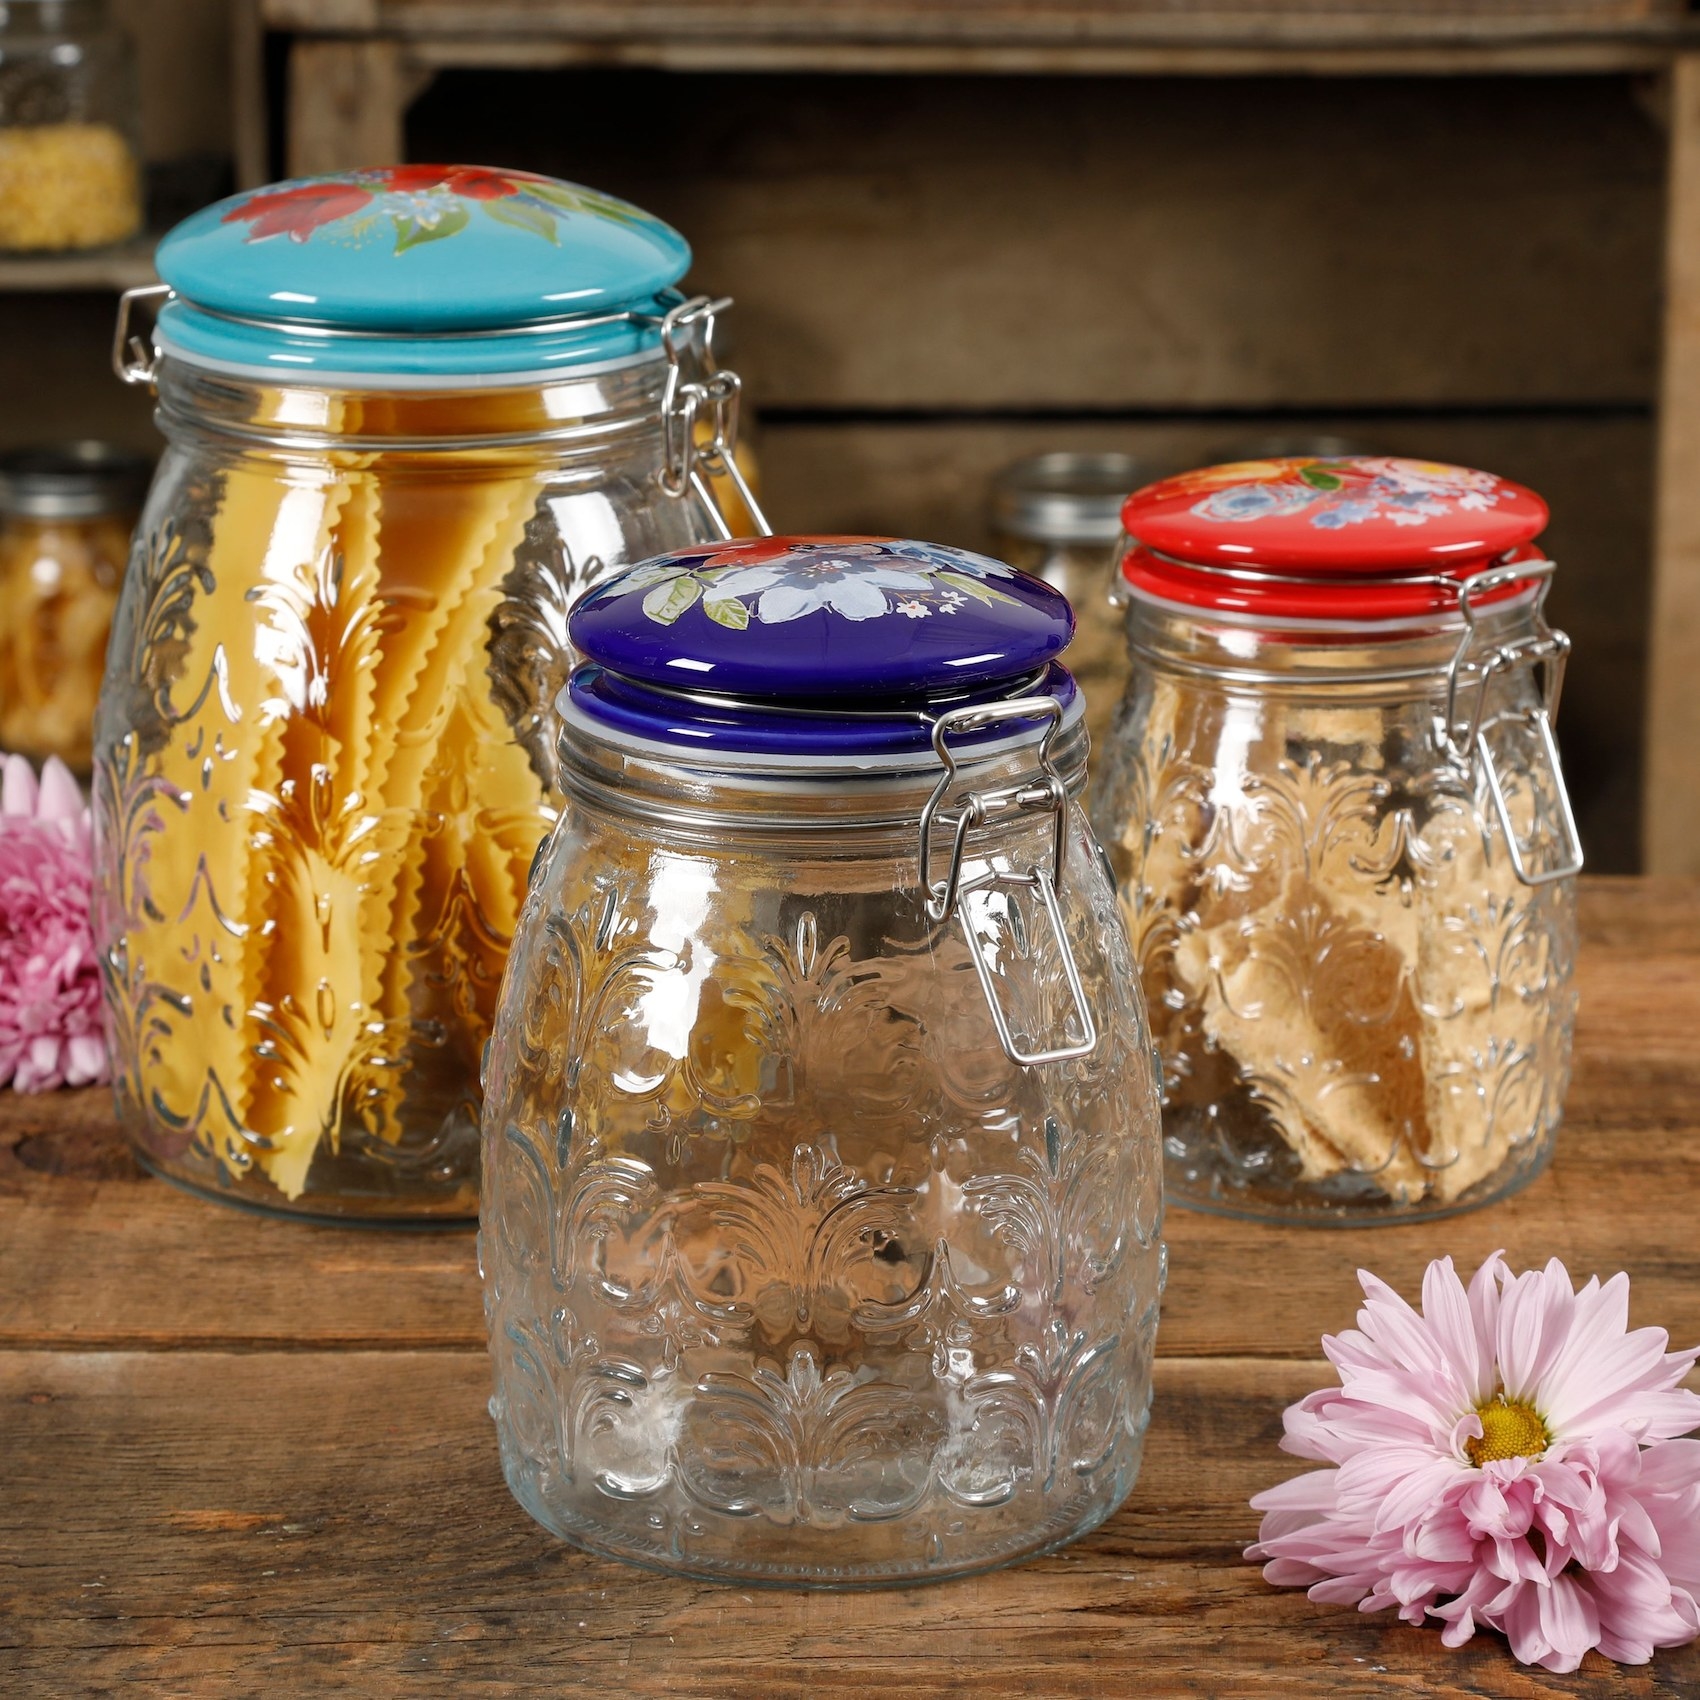 The glass jars with colorful clamp tops storing dry pasta